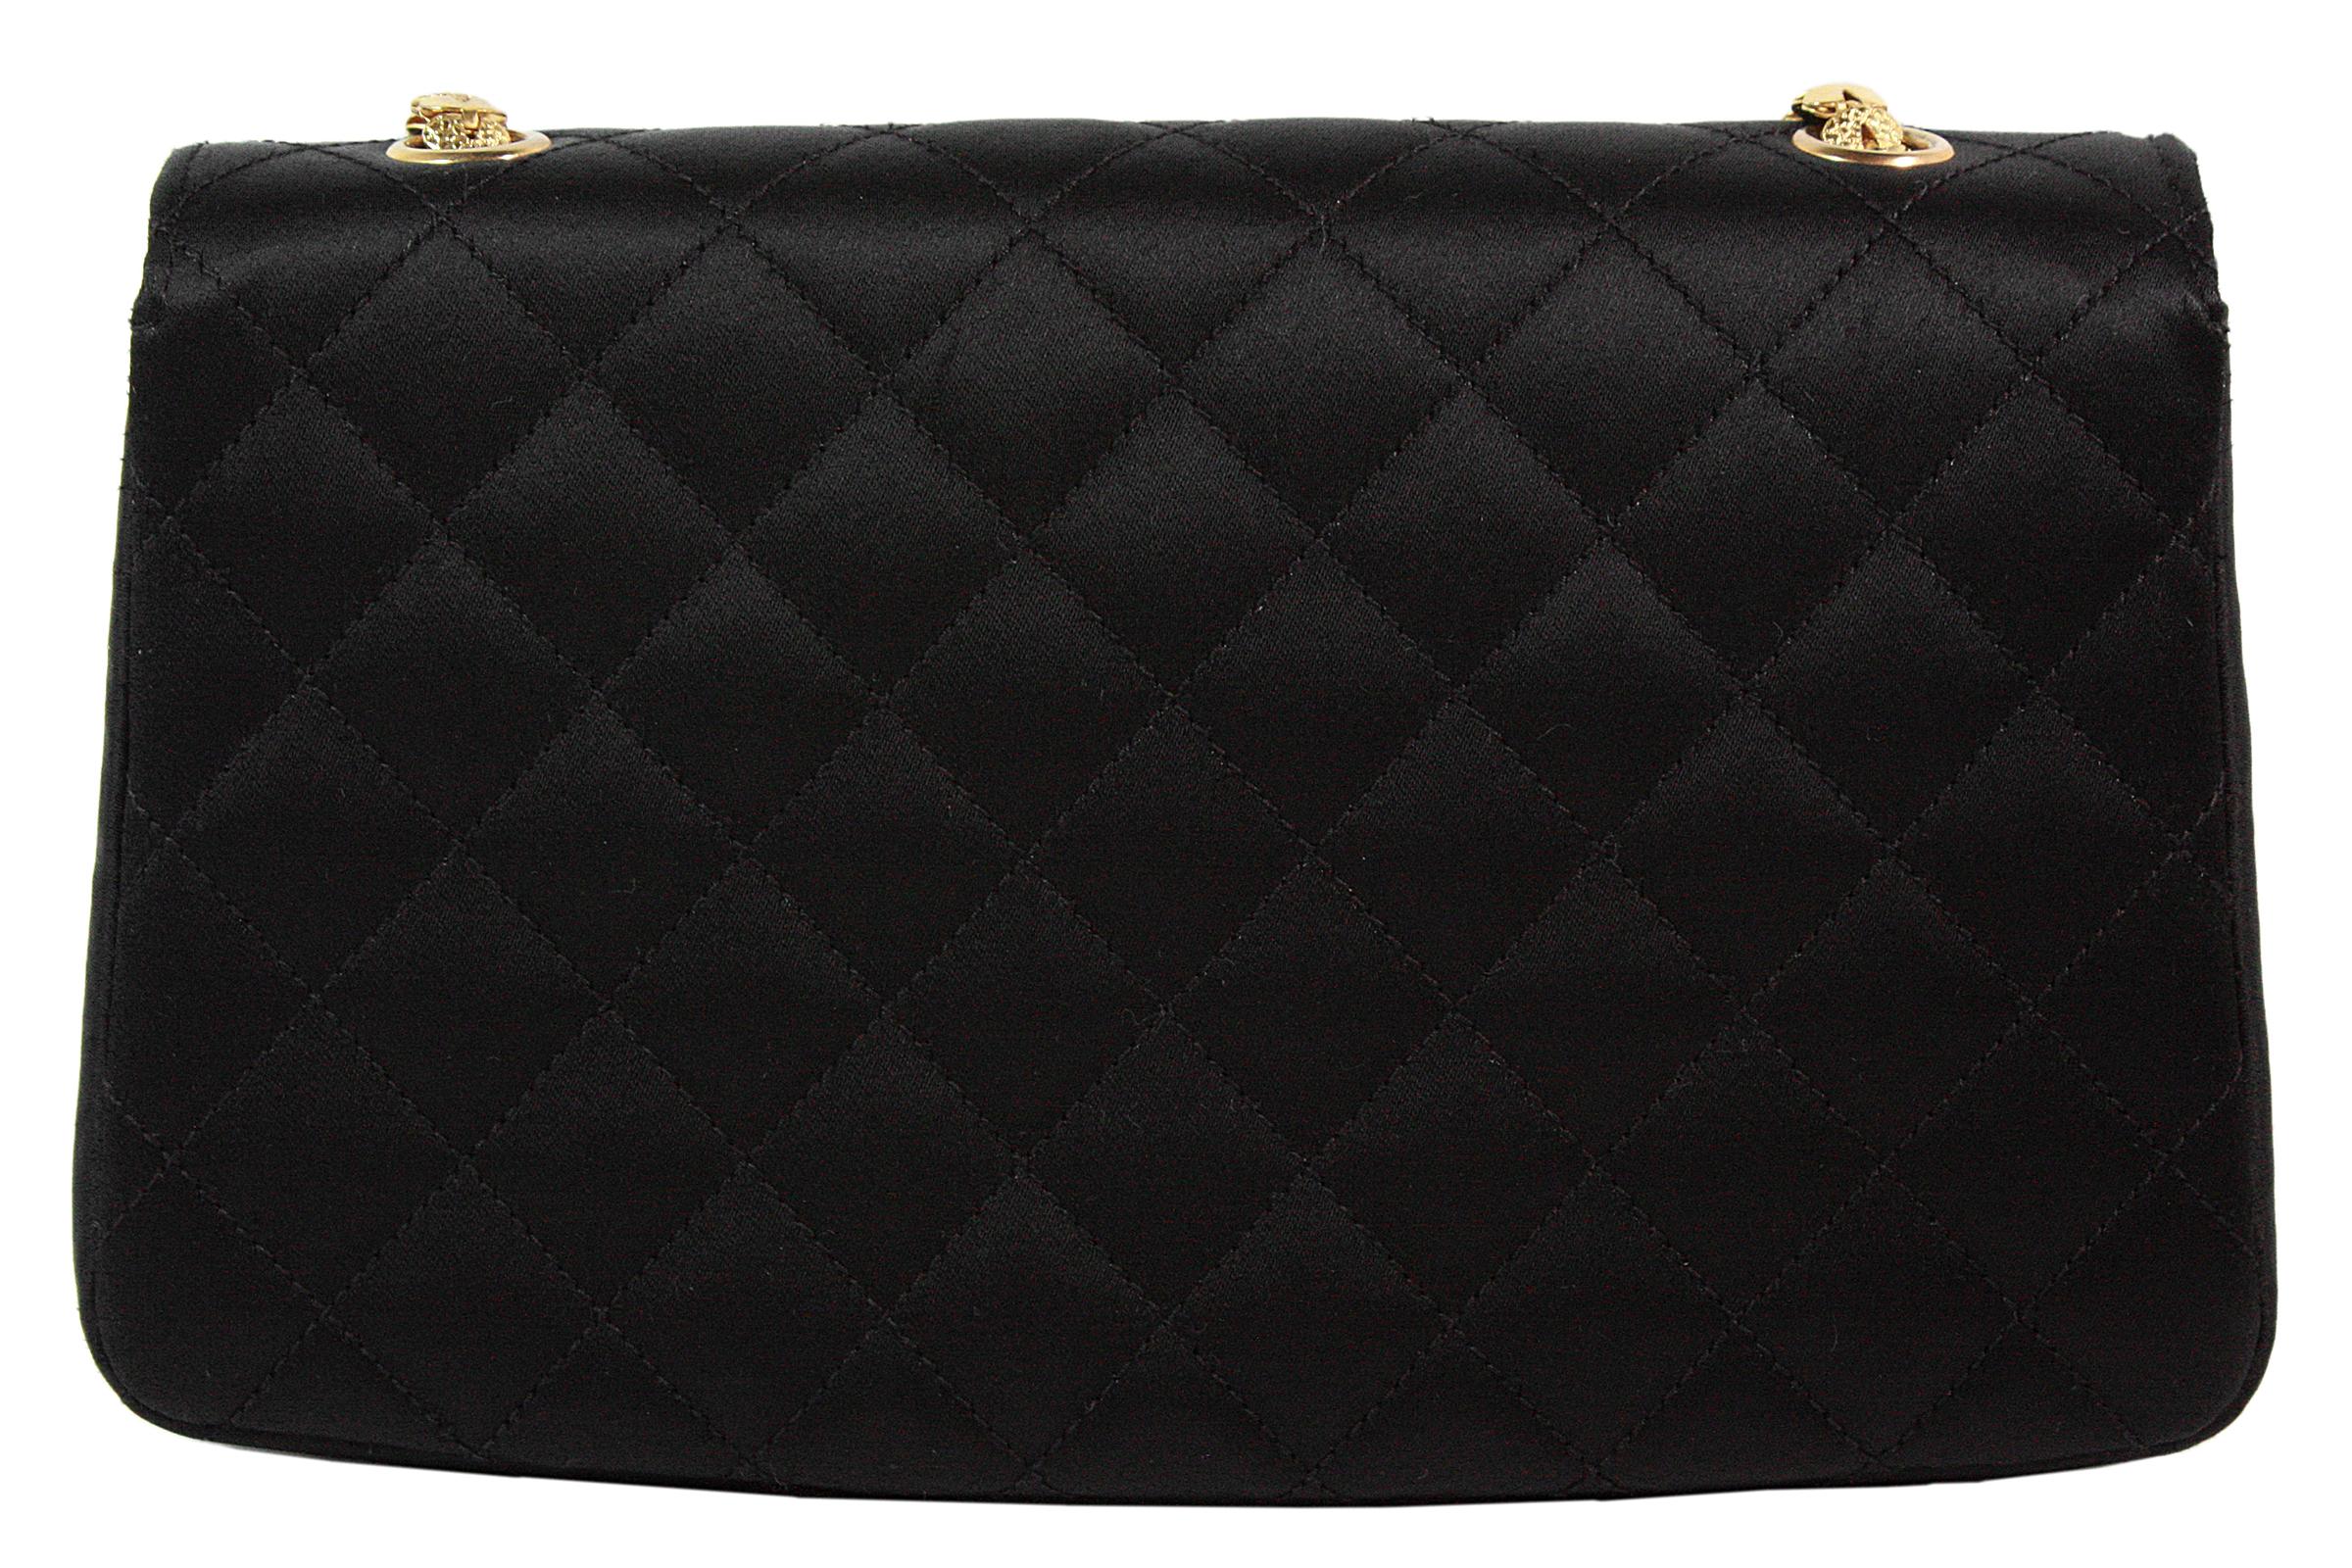 Chanel Black Satin Quilted Crossbody Bag with a Red and Green Gripoix Jewel 1